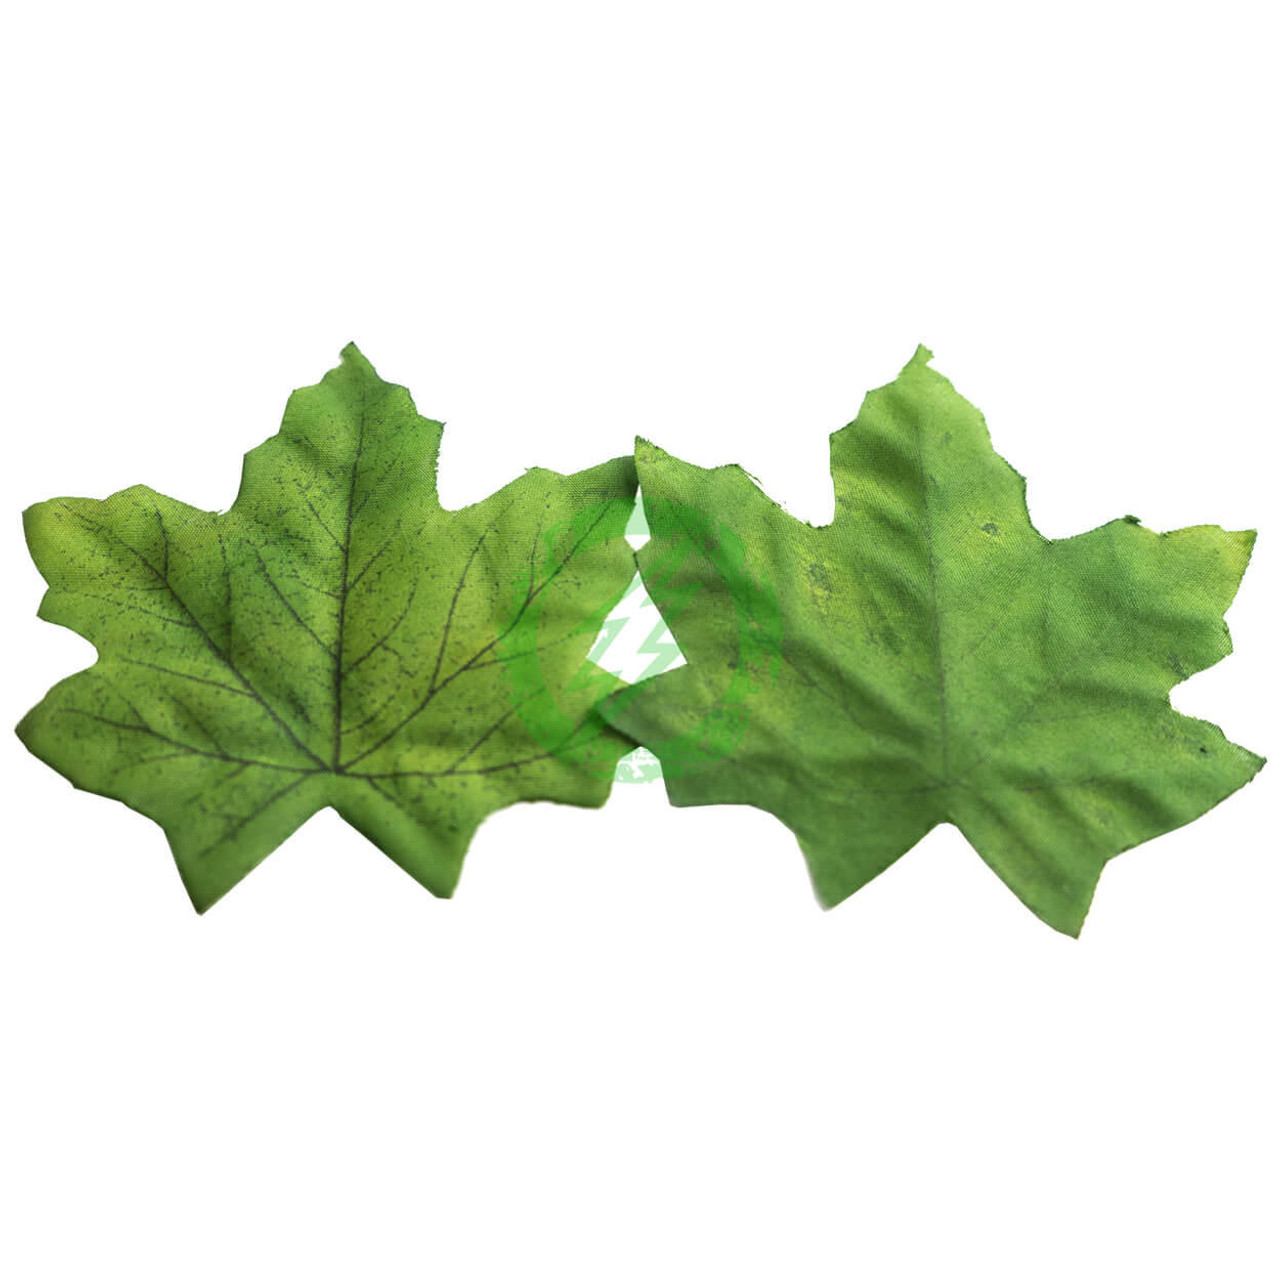  Unique Leaves Single Maple Crafting Leaves | Pack of 50 